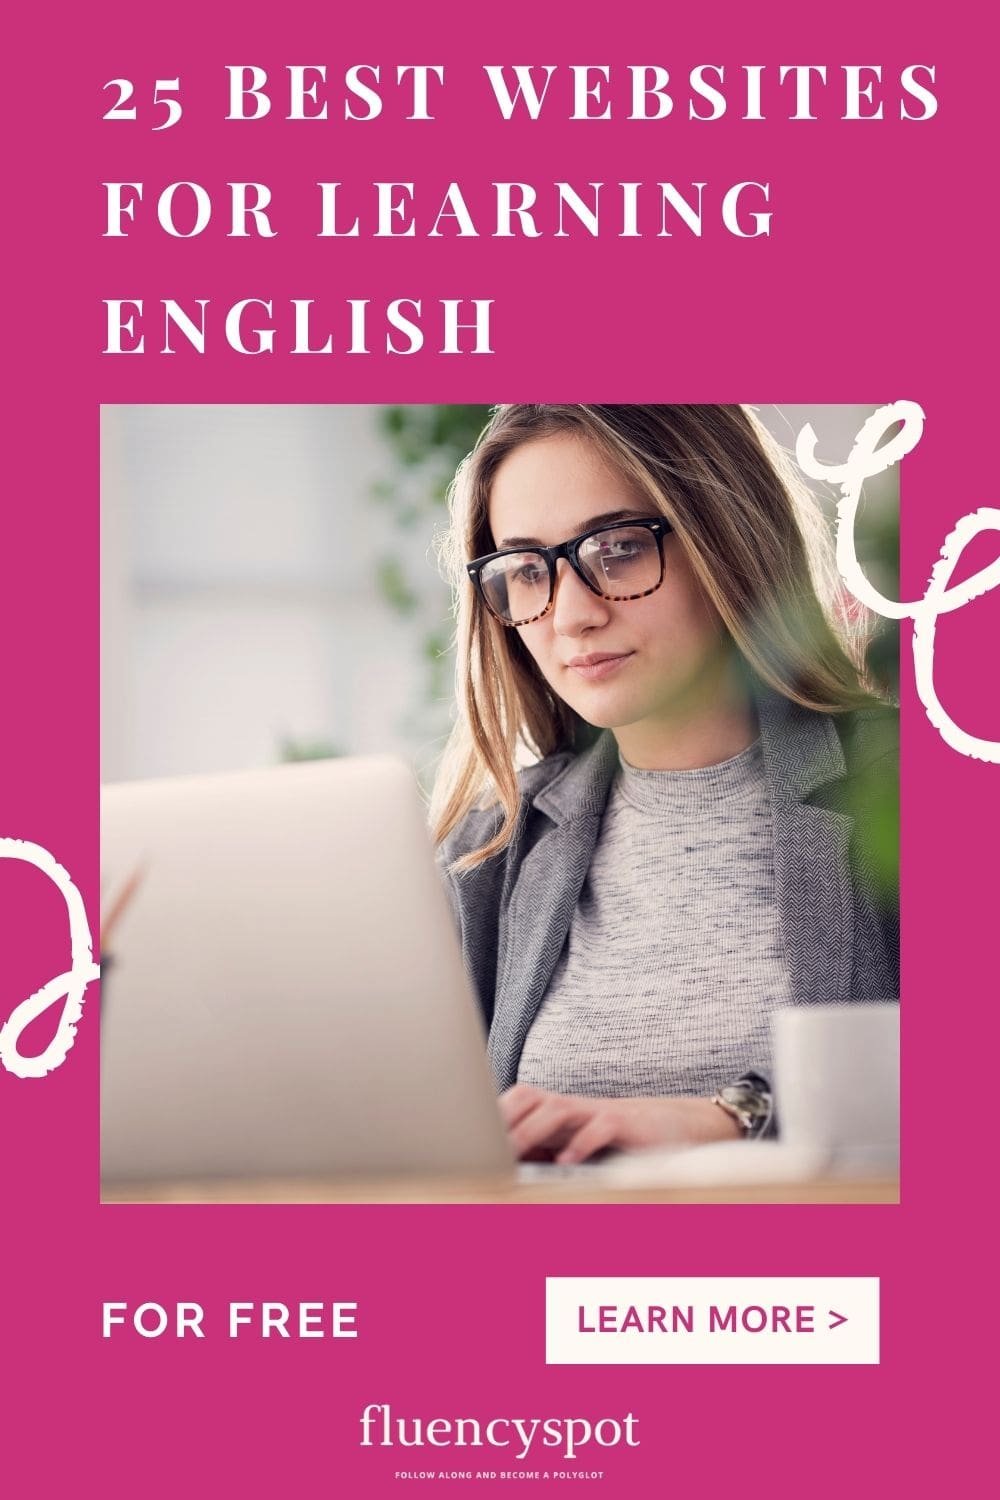 25 Best Websites For Learning English